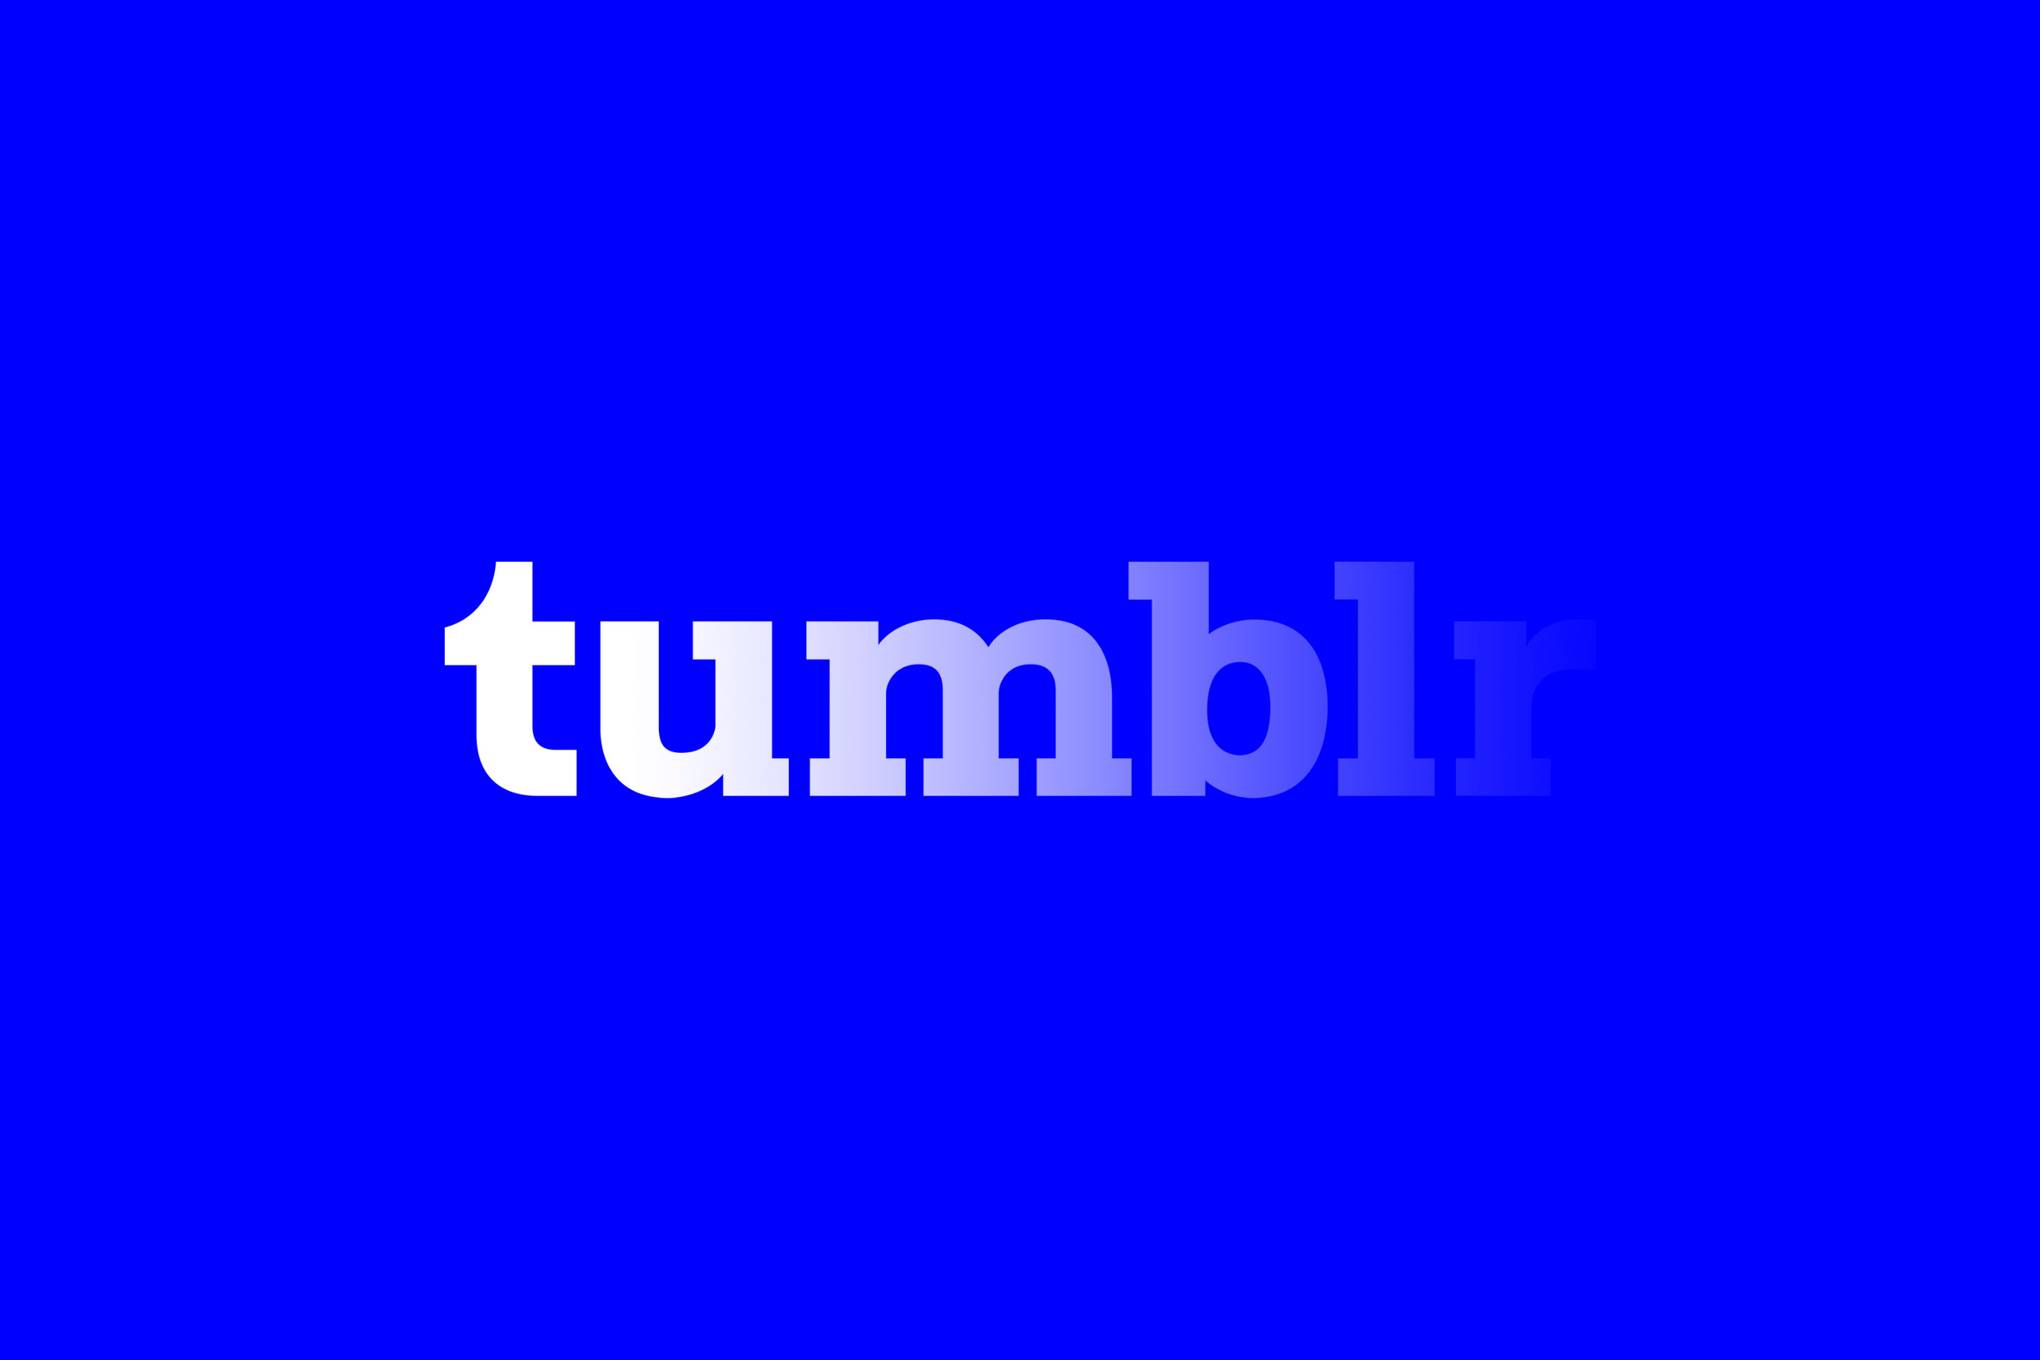 How Yahoo S Prudish Policies Pushed Tumblr Into Obscurity Wired Uk